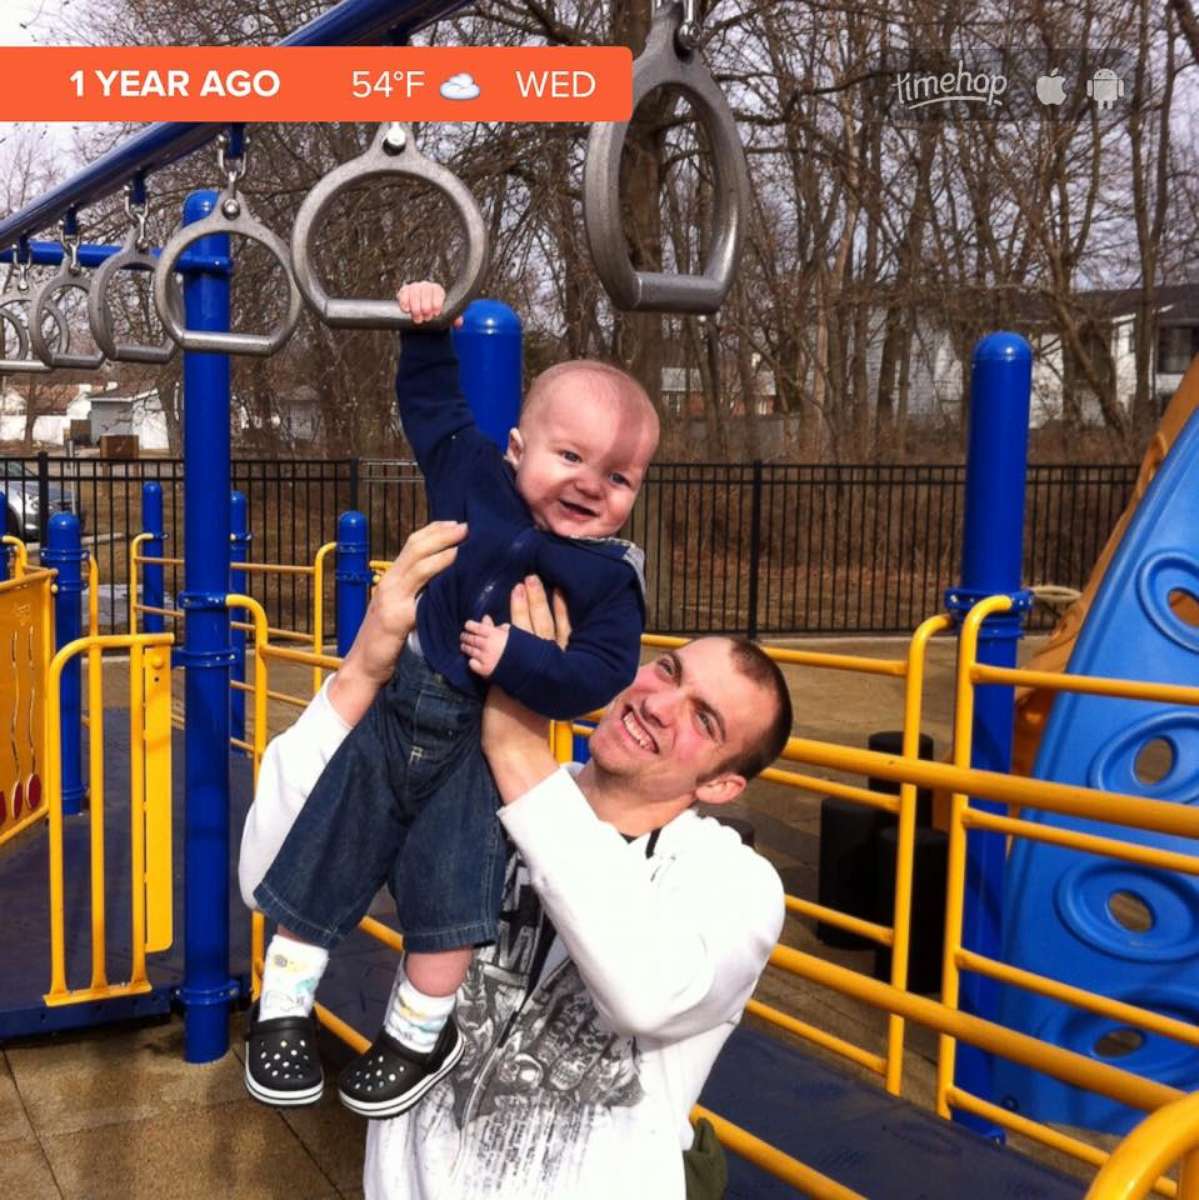 PHOTO: Corey Mantia and his son Parker are seen here in this undated file photo.